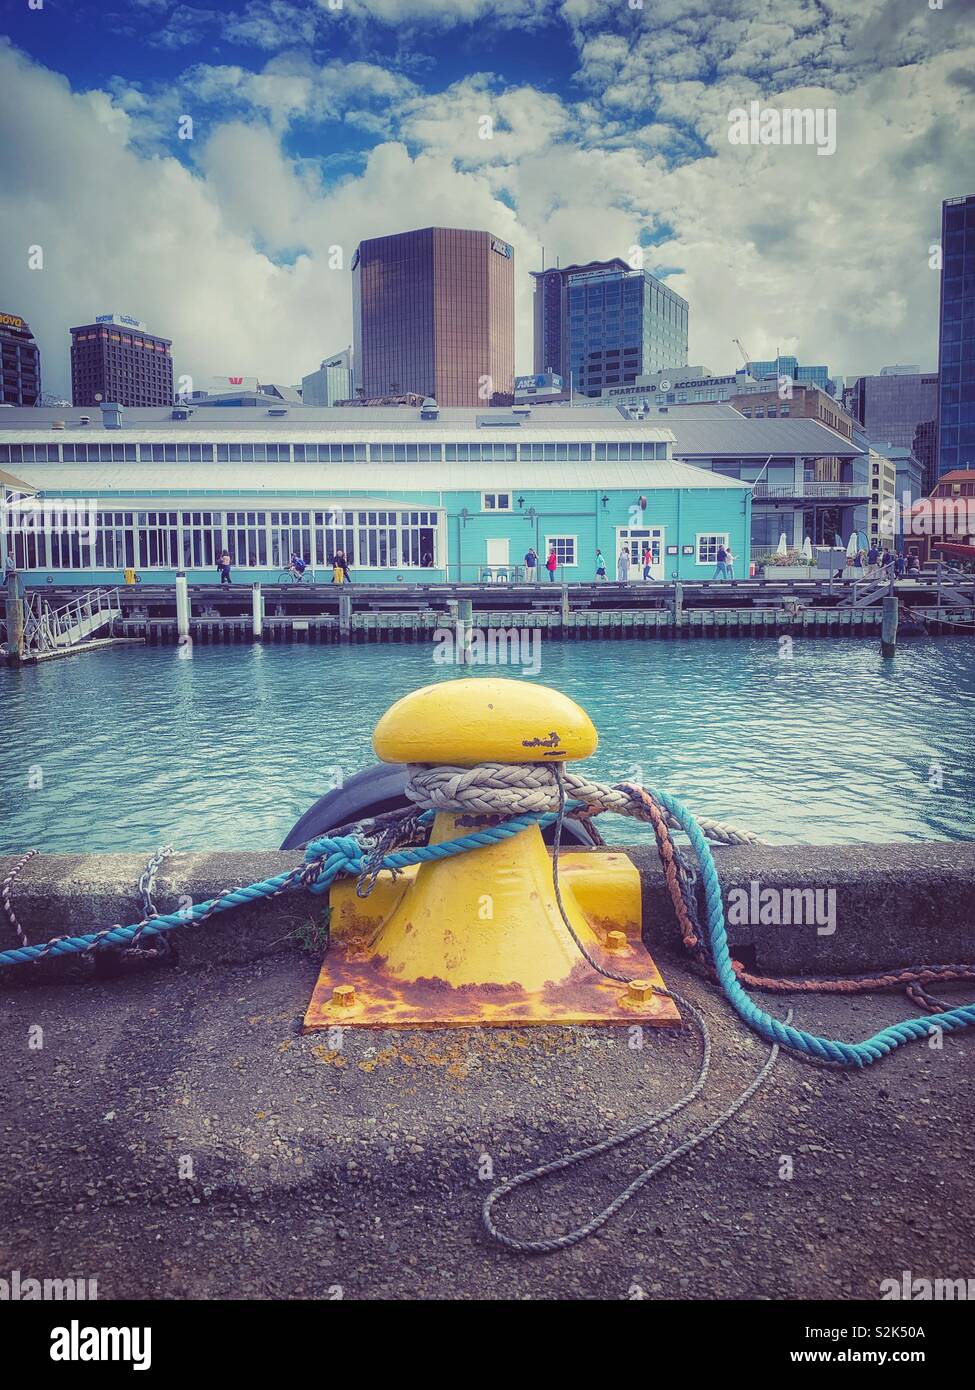 Yellow bollard on a dock in the city Stock Photo